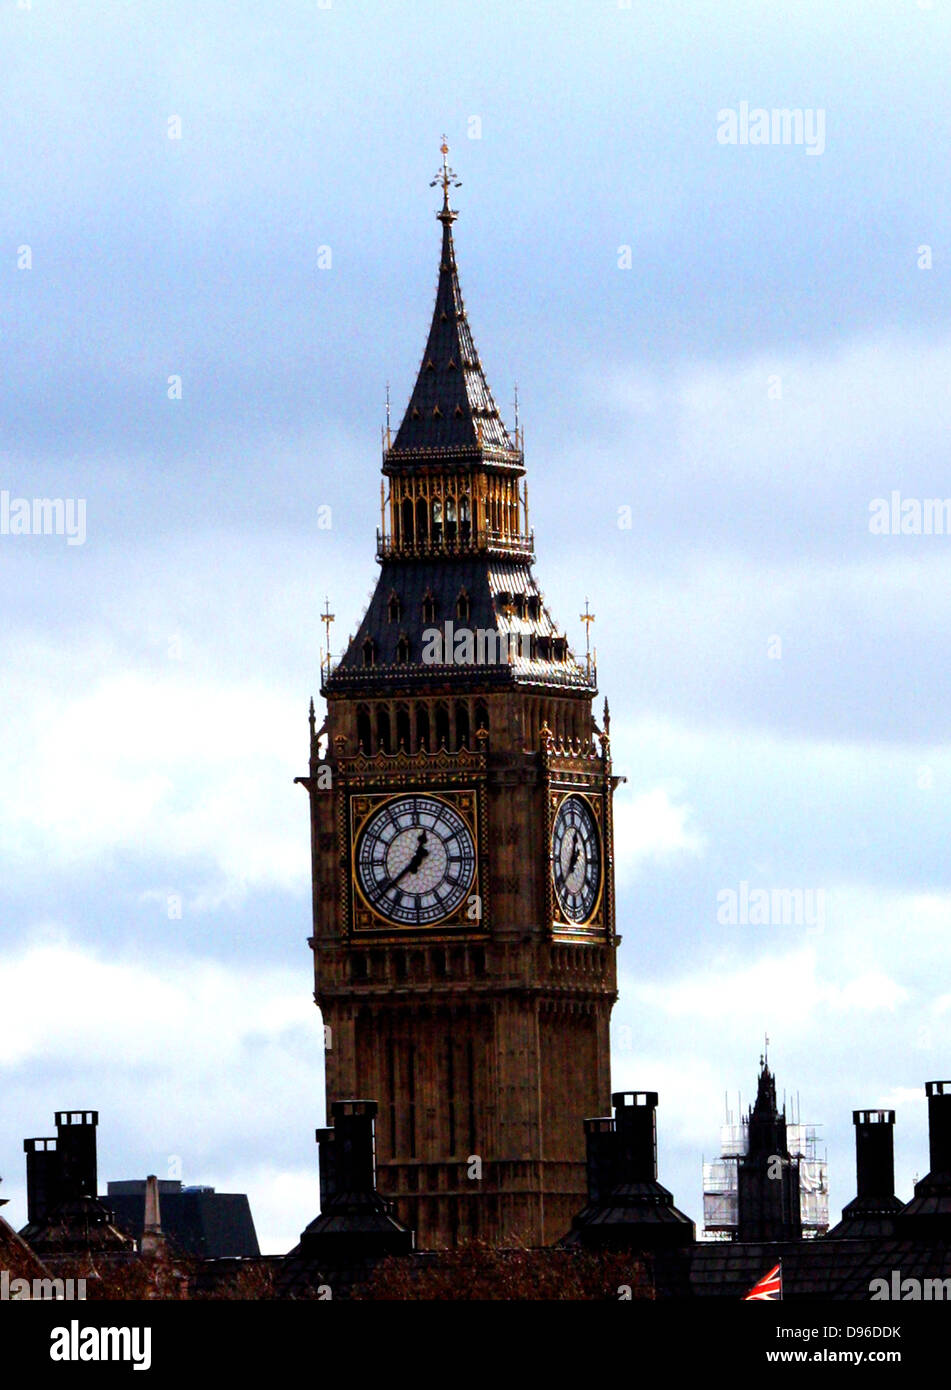 Big ben 1858 bell hi-res stock photography and images - Alamy